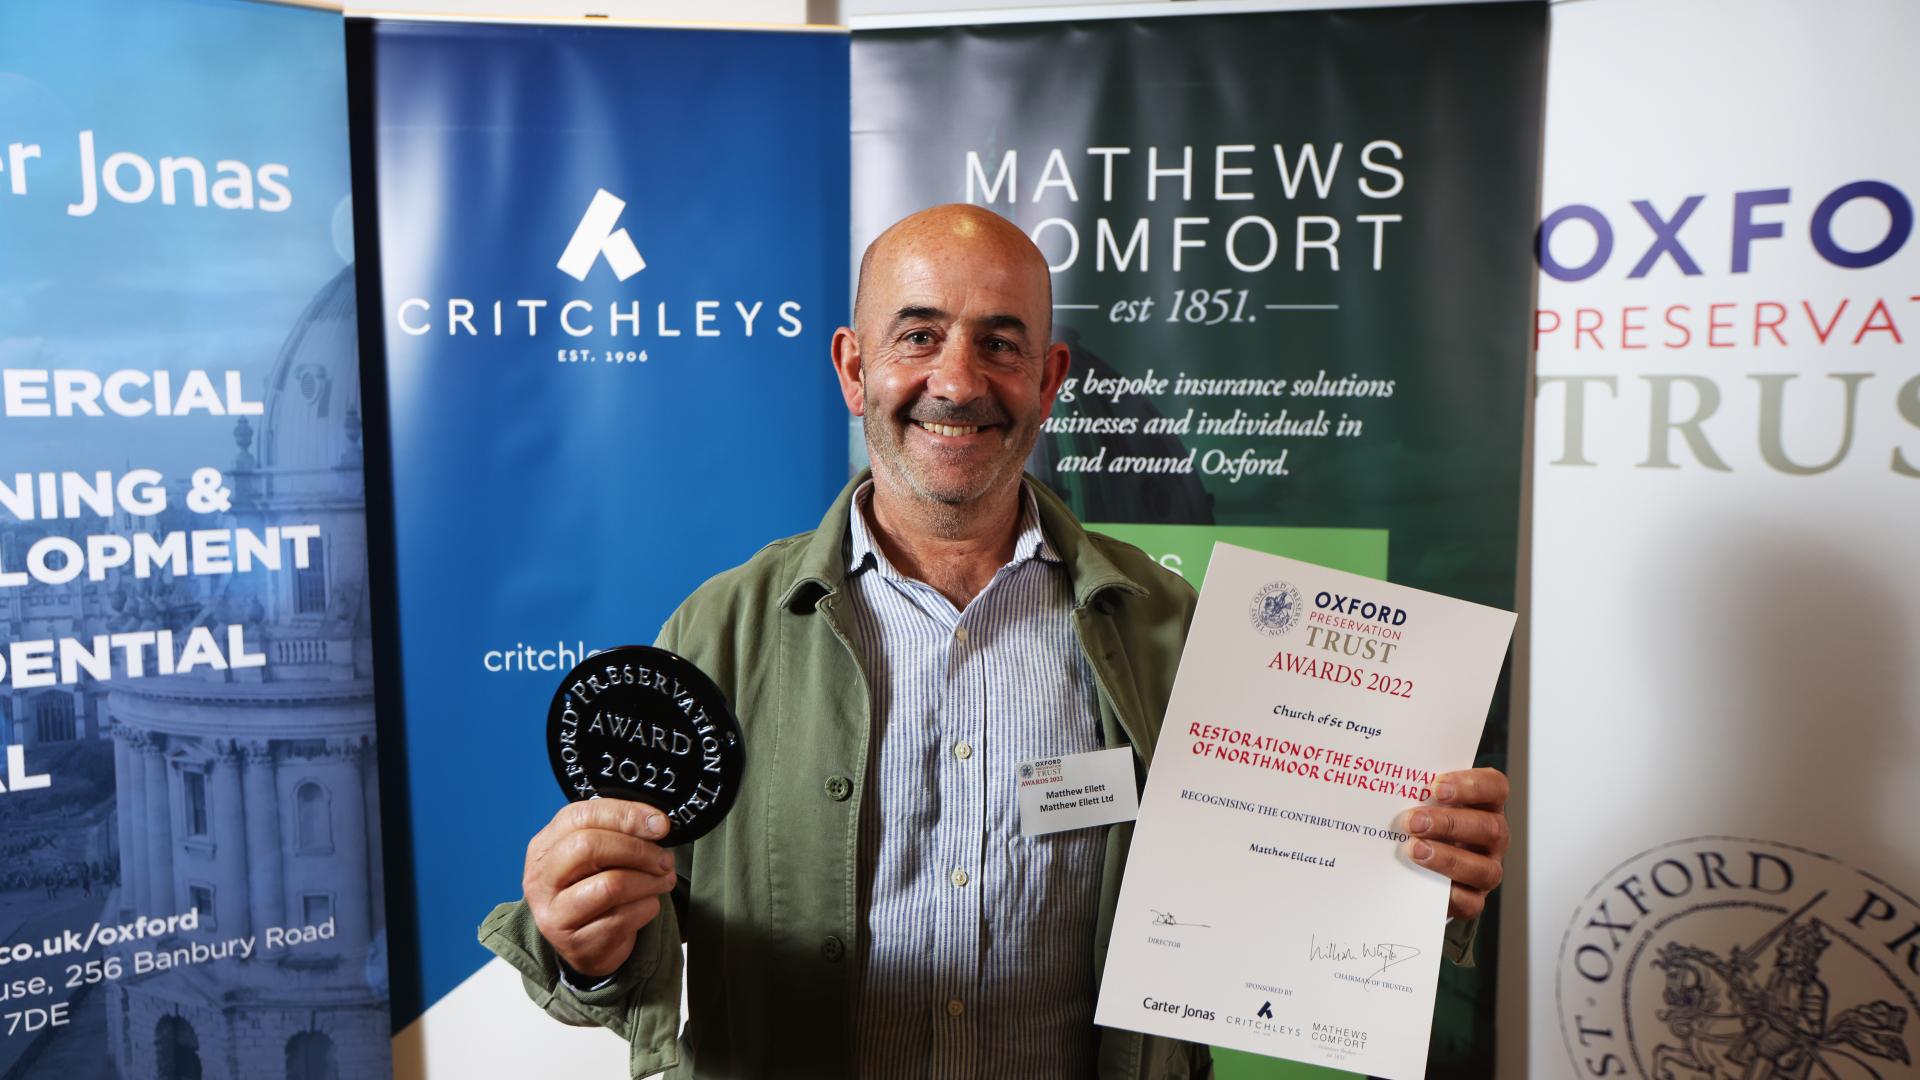 A man holding up an OPT awards plaque and certificate